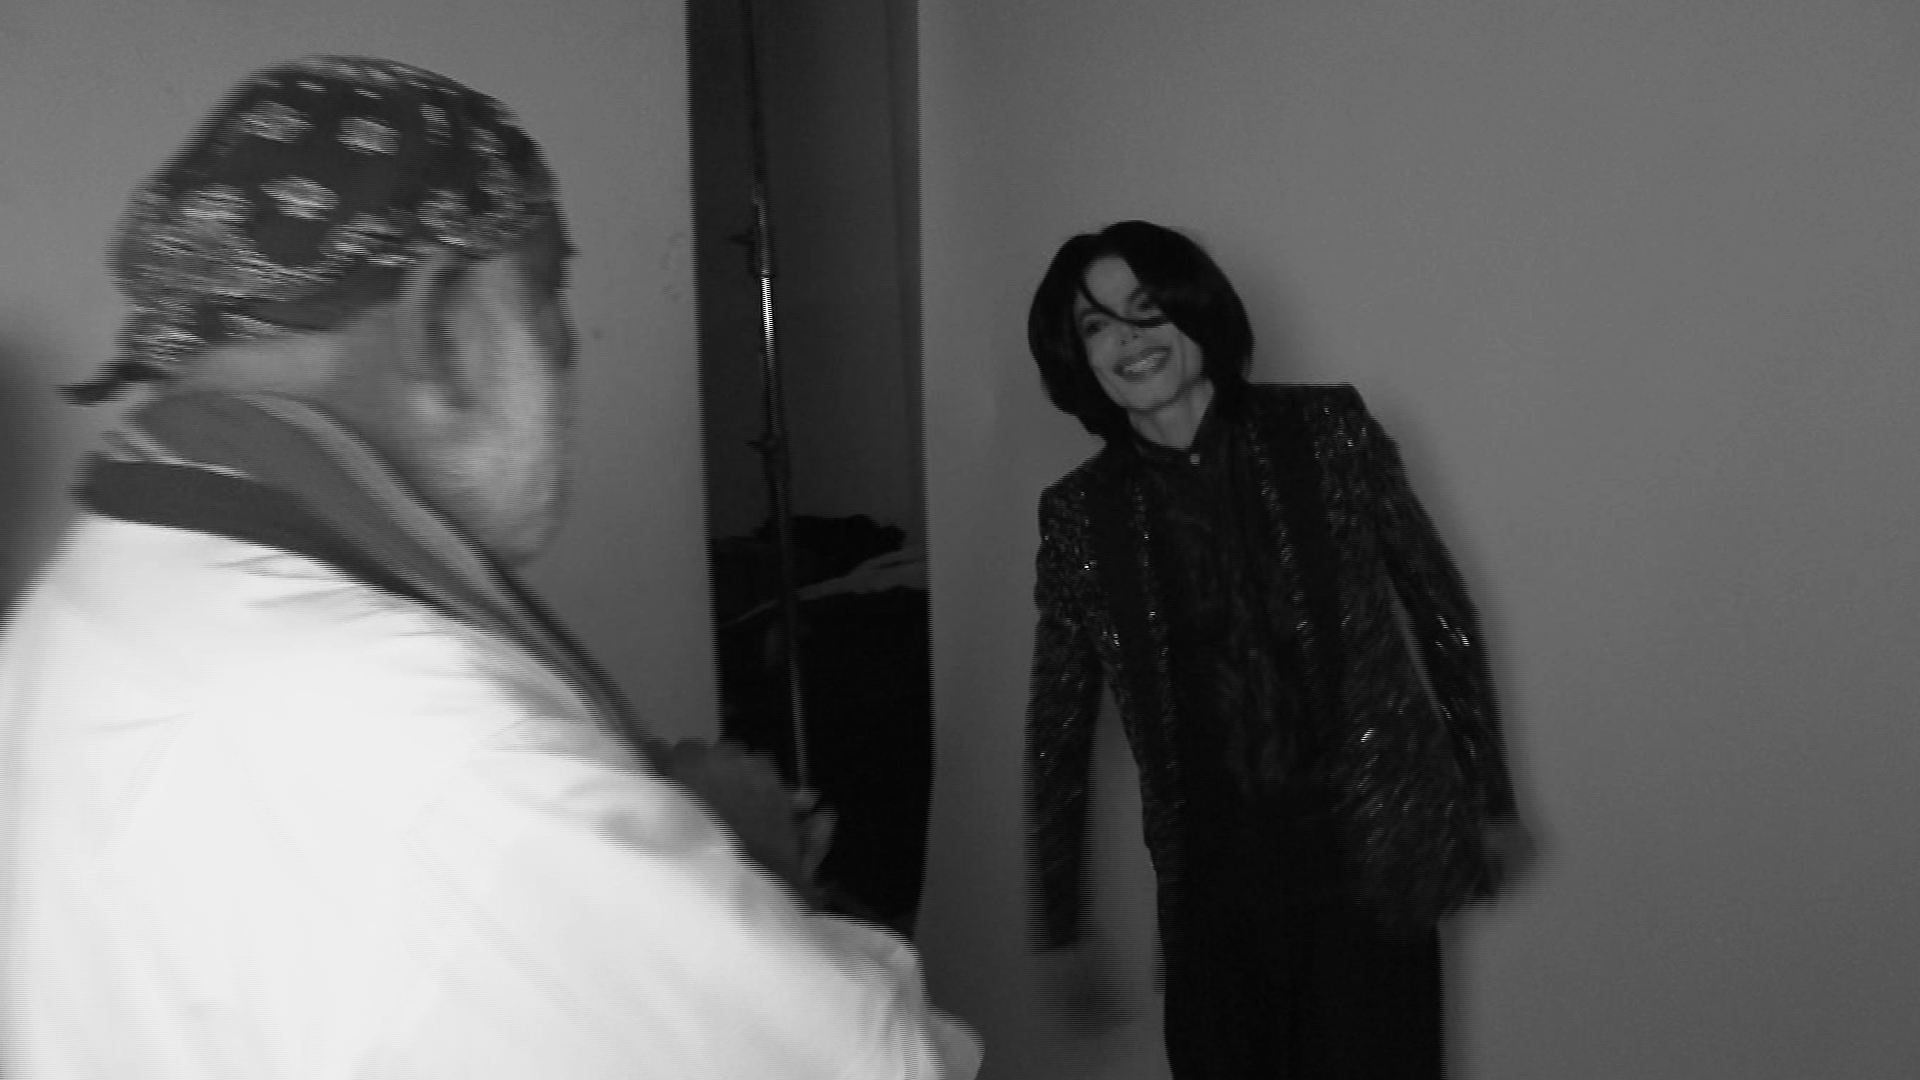 Never-before-seen-Uomo-Vogue-2007-photoshoot-michael-jackson-35577649-1920-1080.png